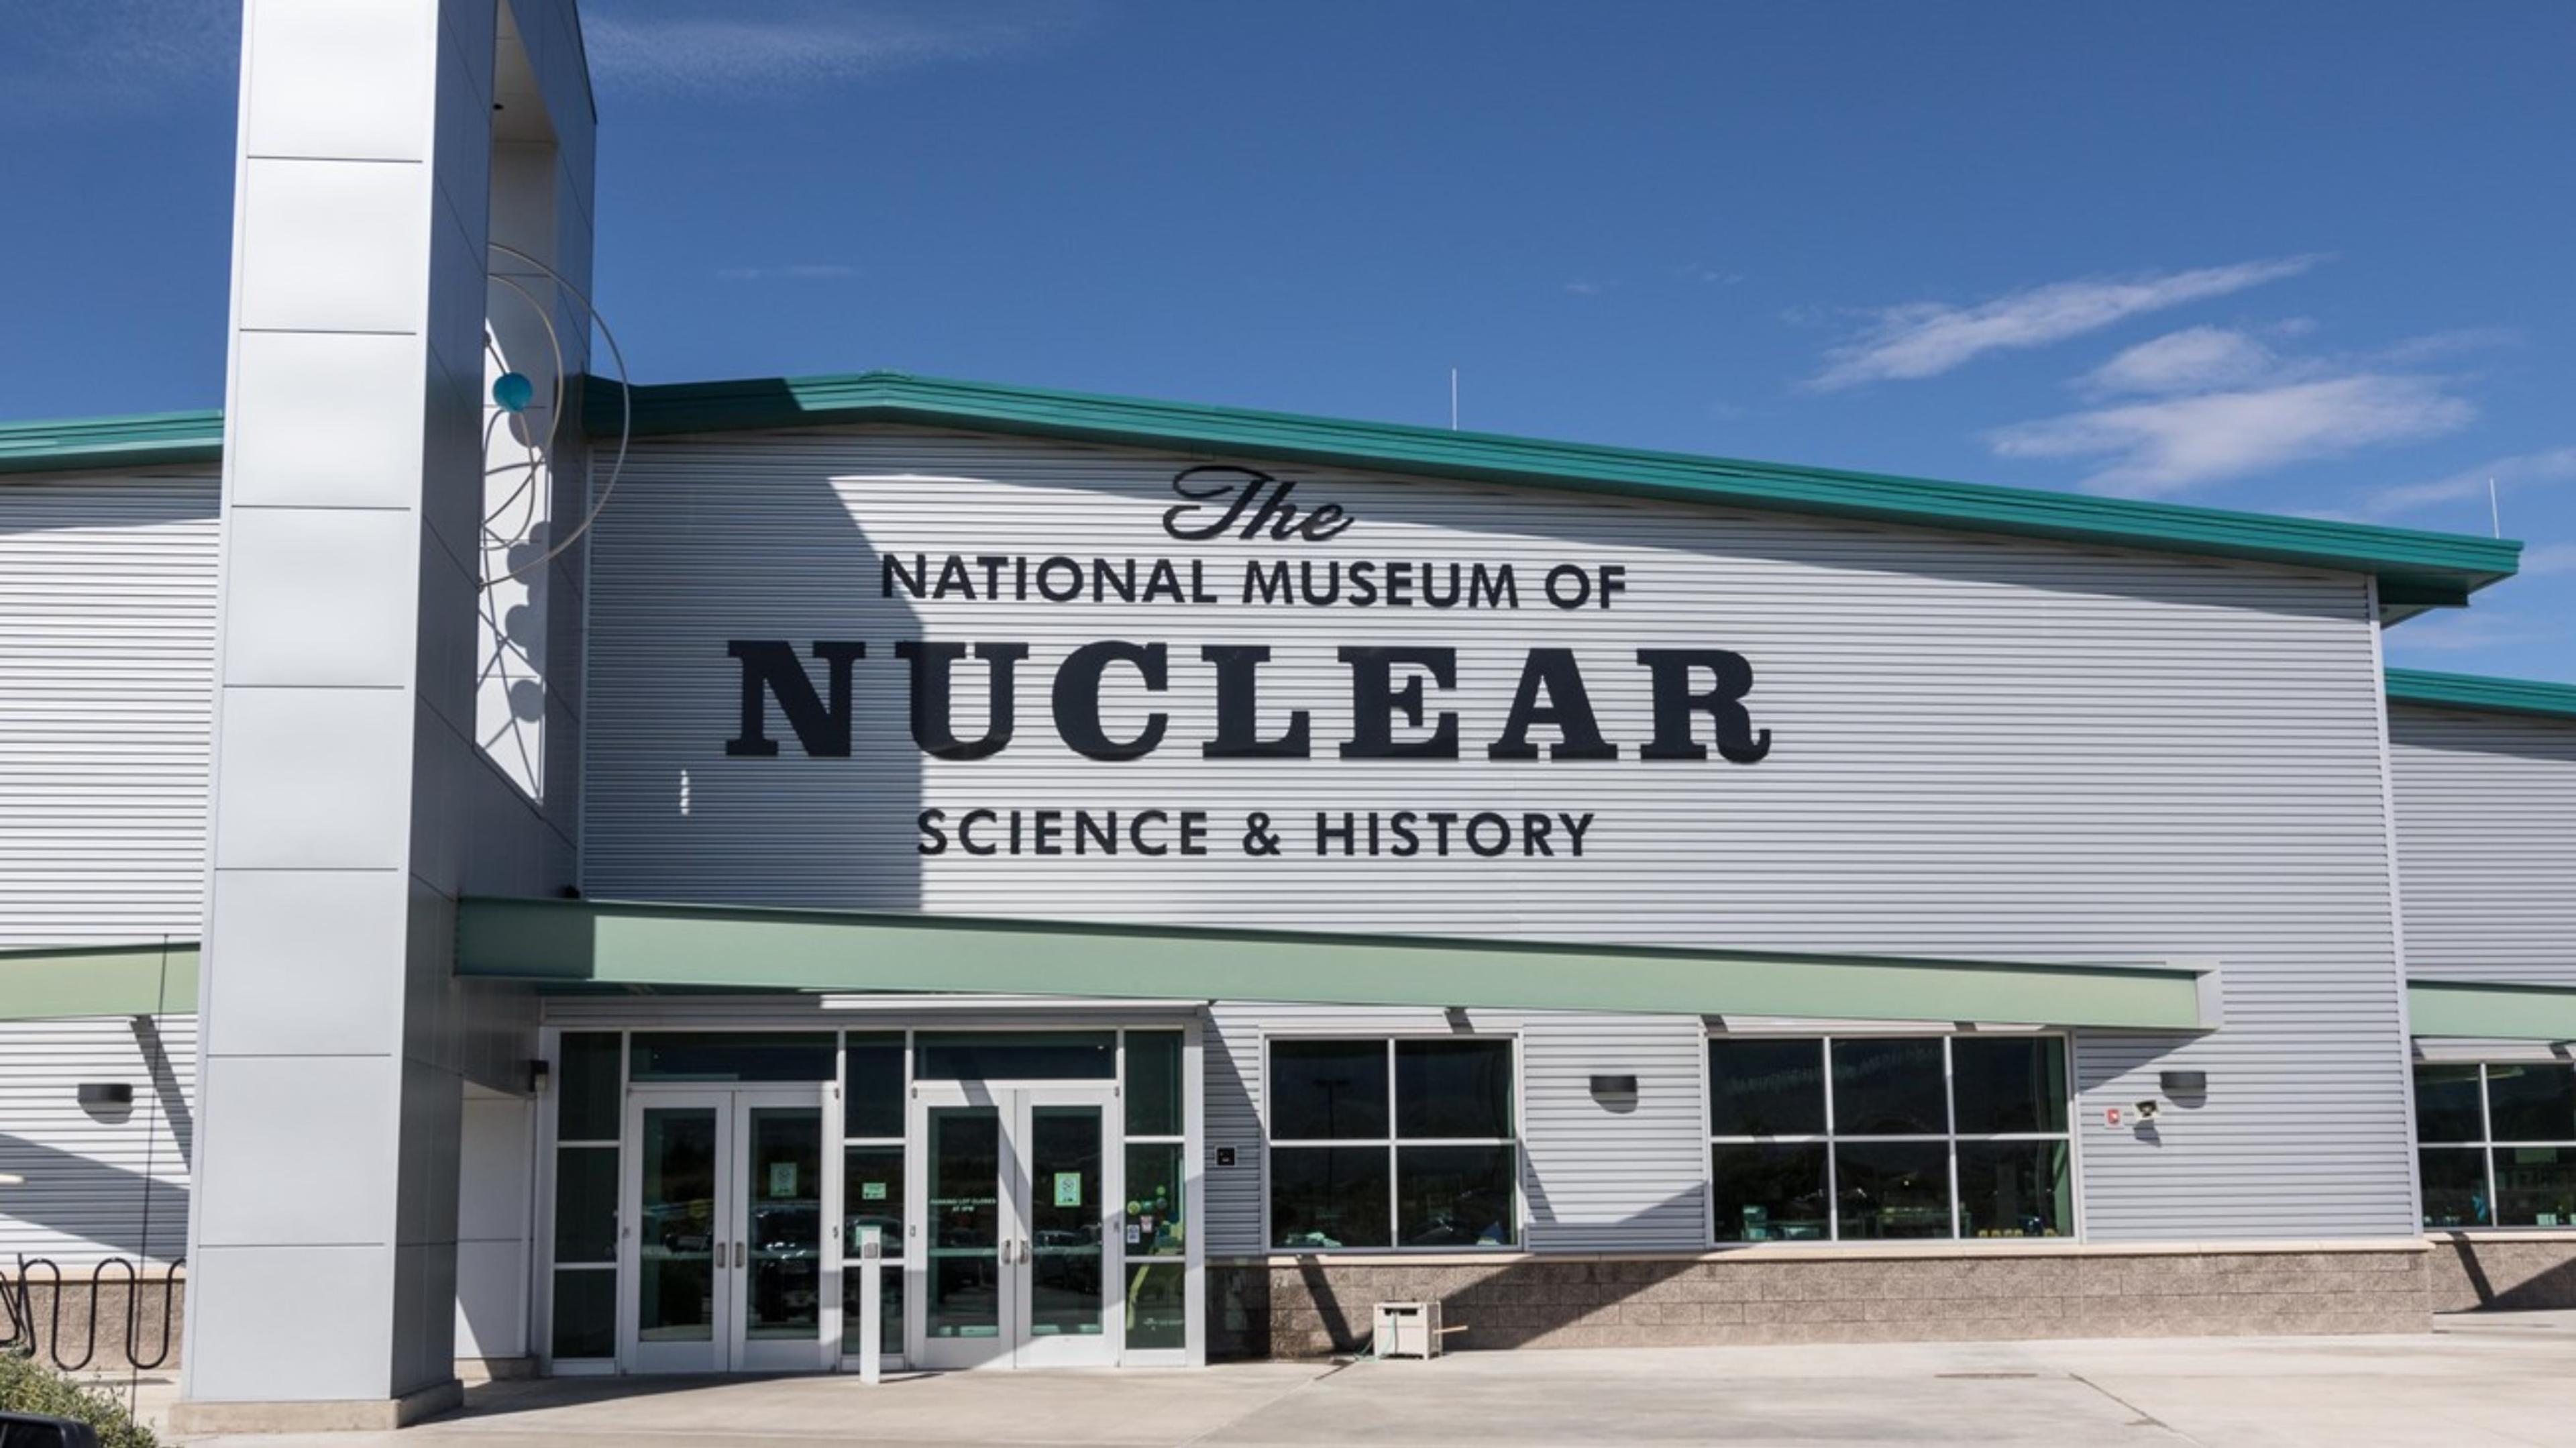 National Museum of Nuclear Science and History